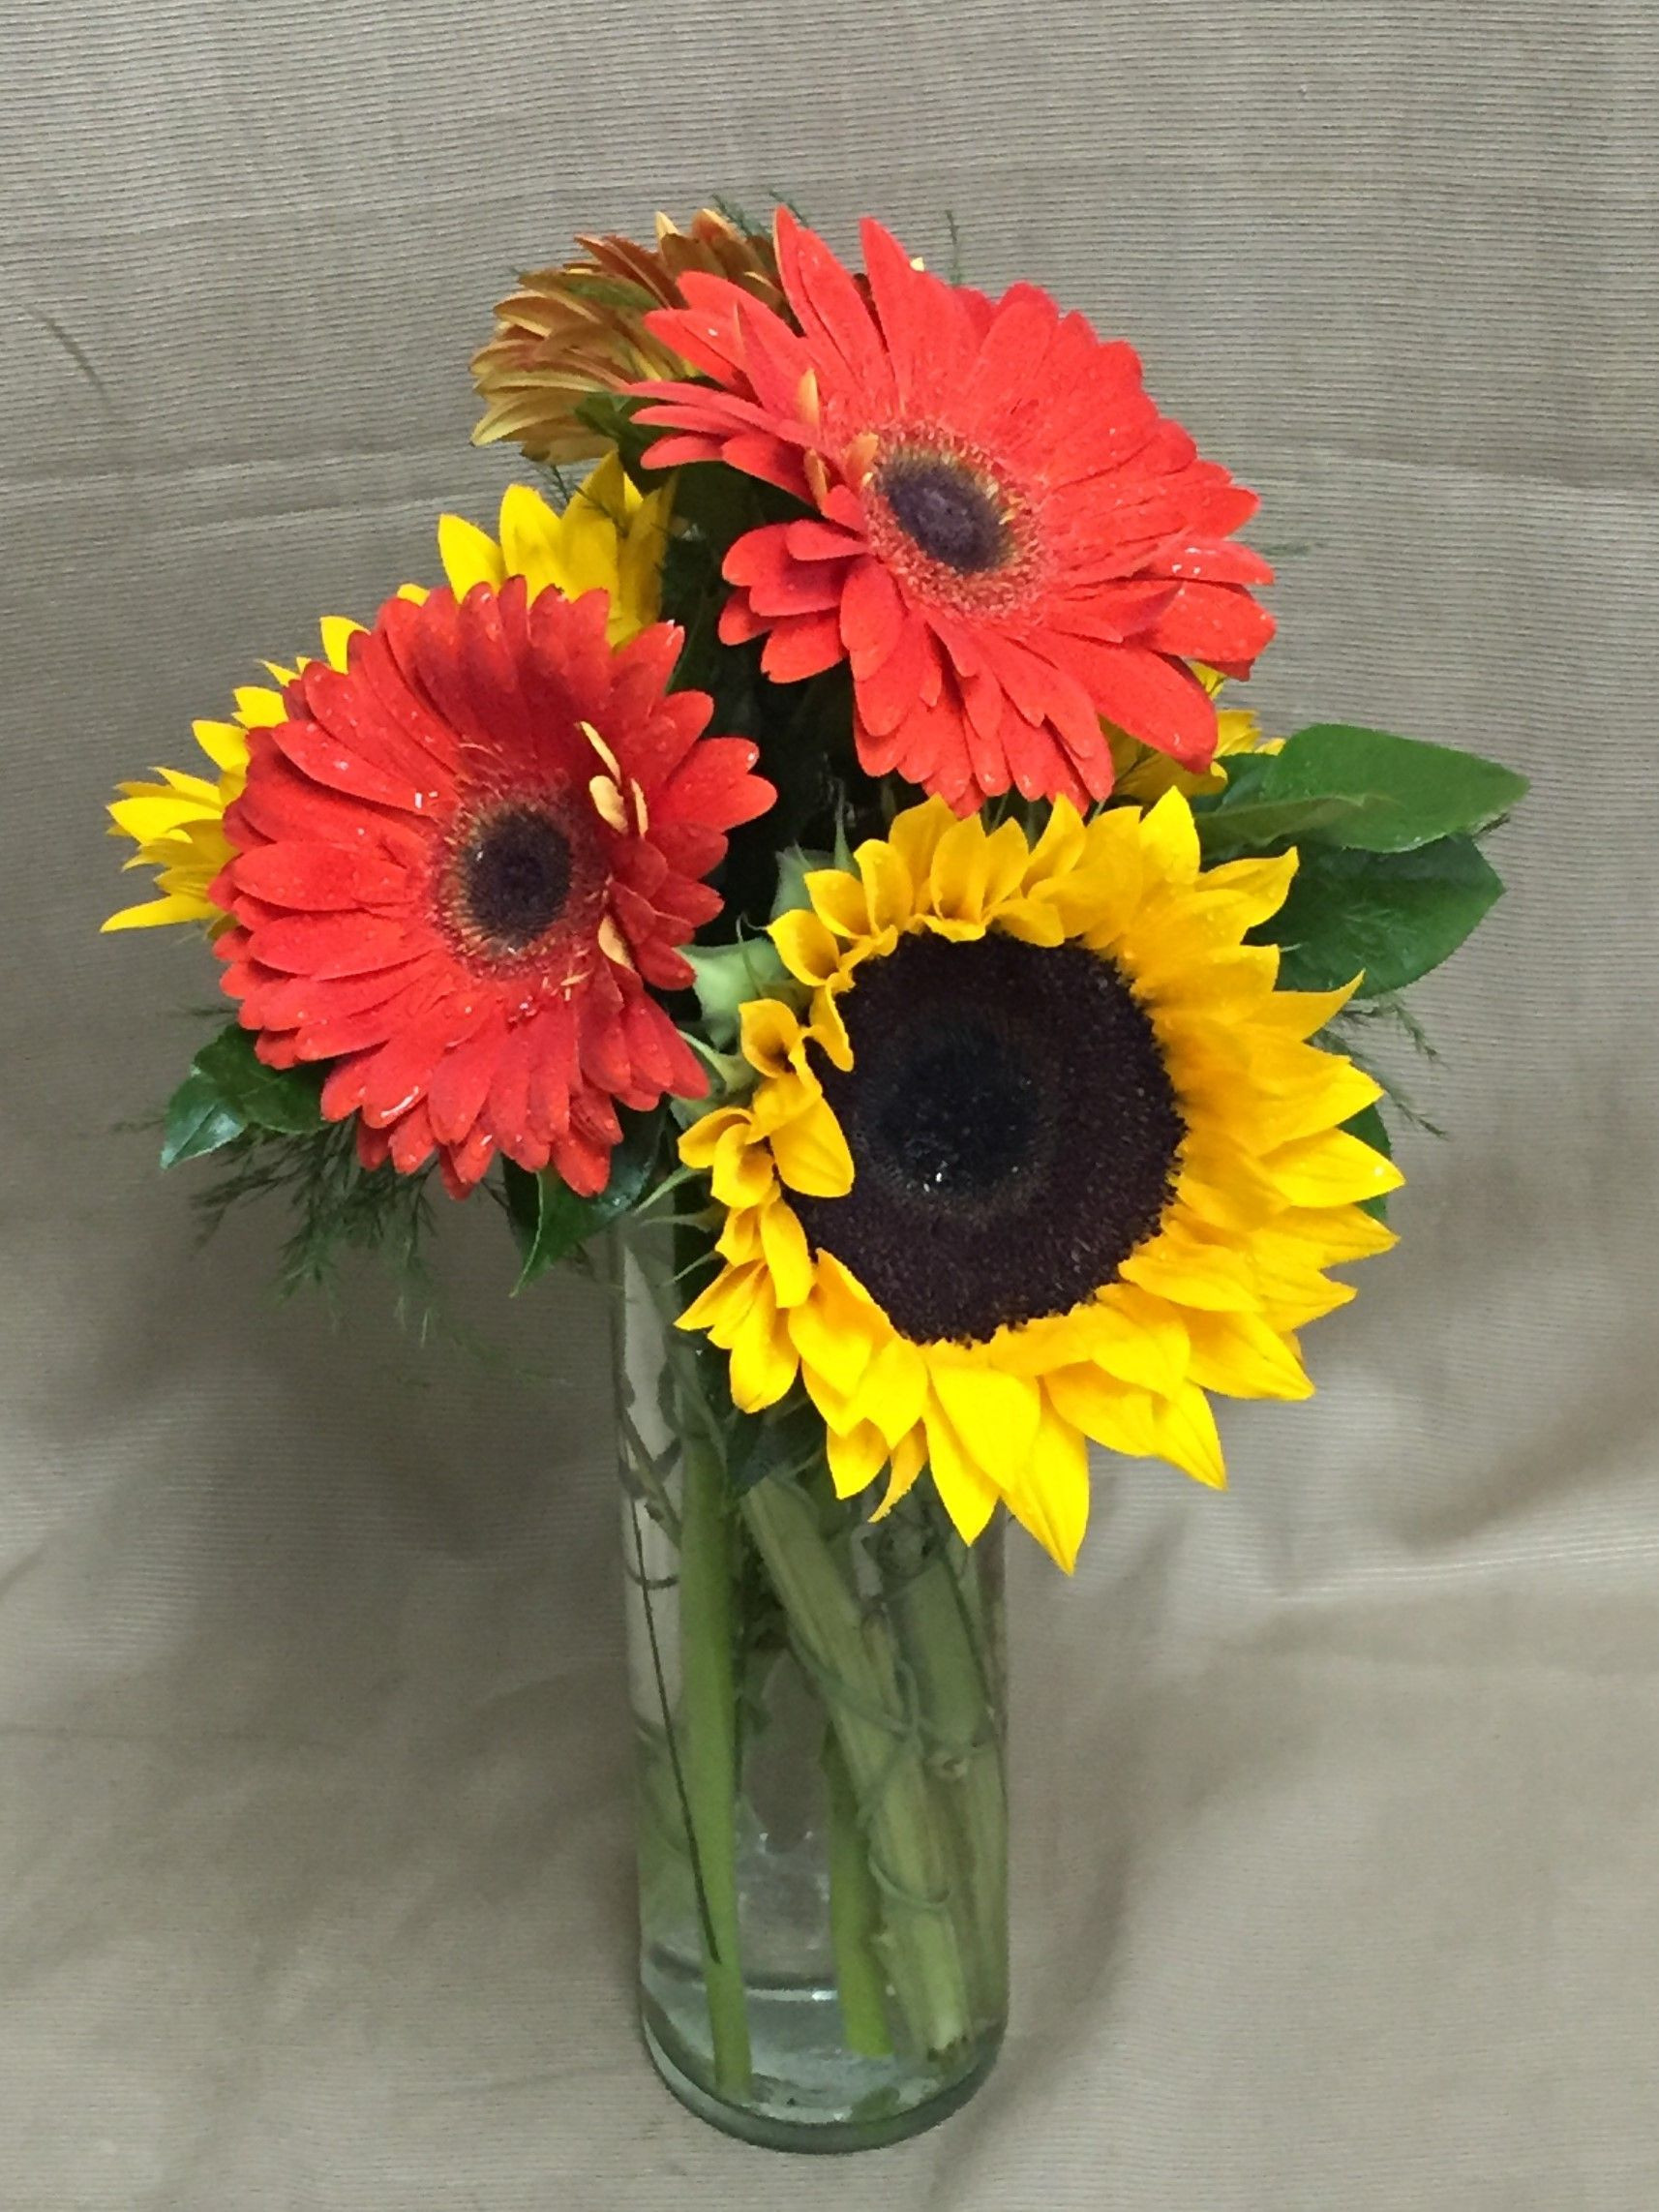 19 Amazing Gerbera Daisy In Vase 2024 free download gerbera daisy in vase of brilliant birthday yellow sunflowers orange gerbera daisies salal for brilliant birthday yellow sunflowers orange gerbera daisies salal and tree fern in a tall cylin